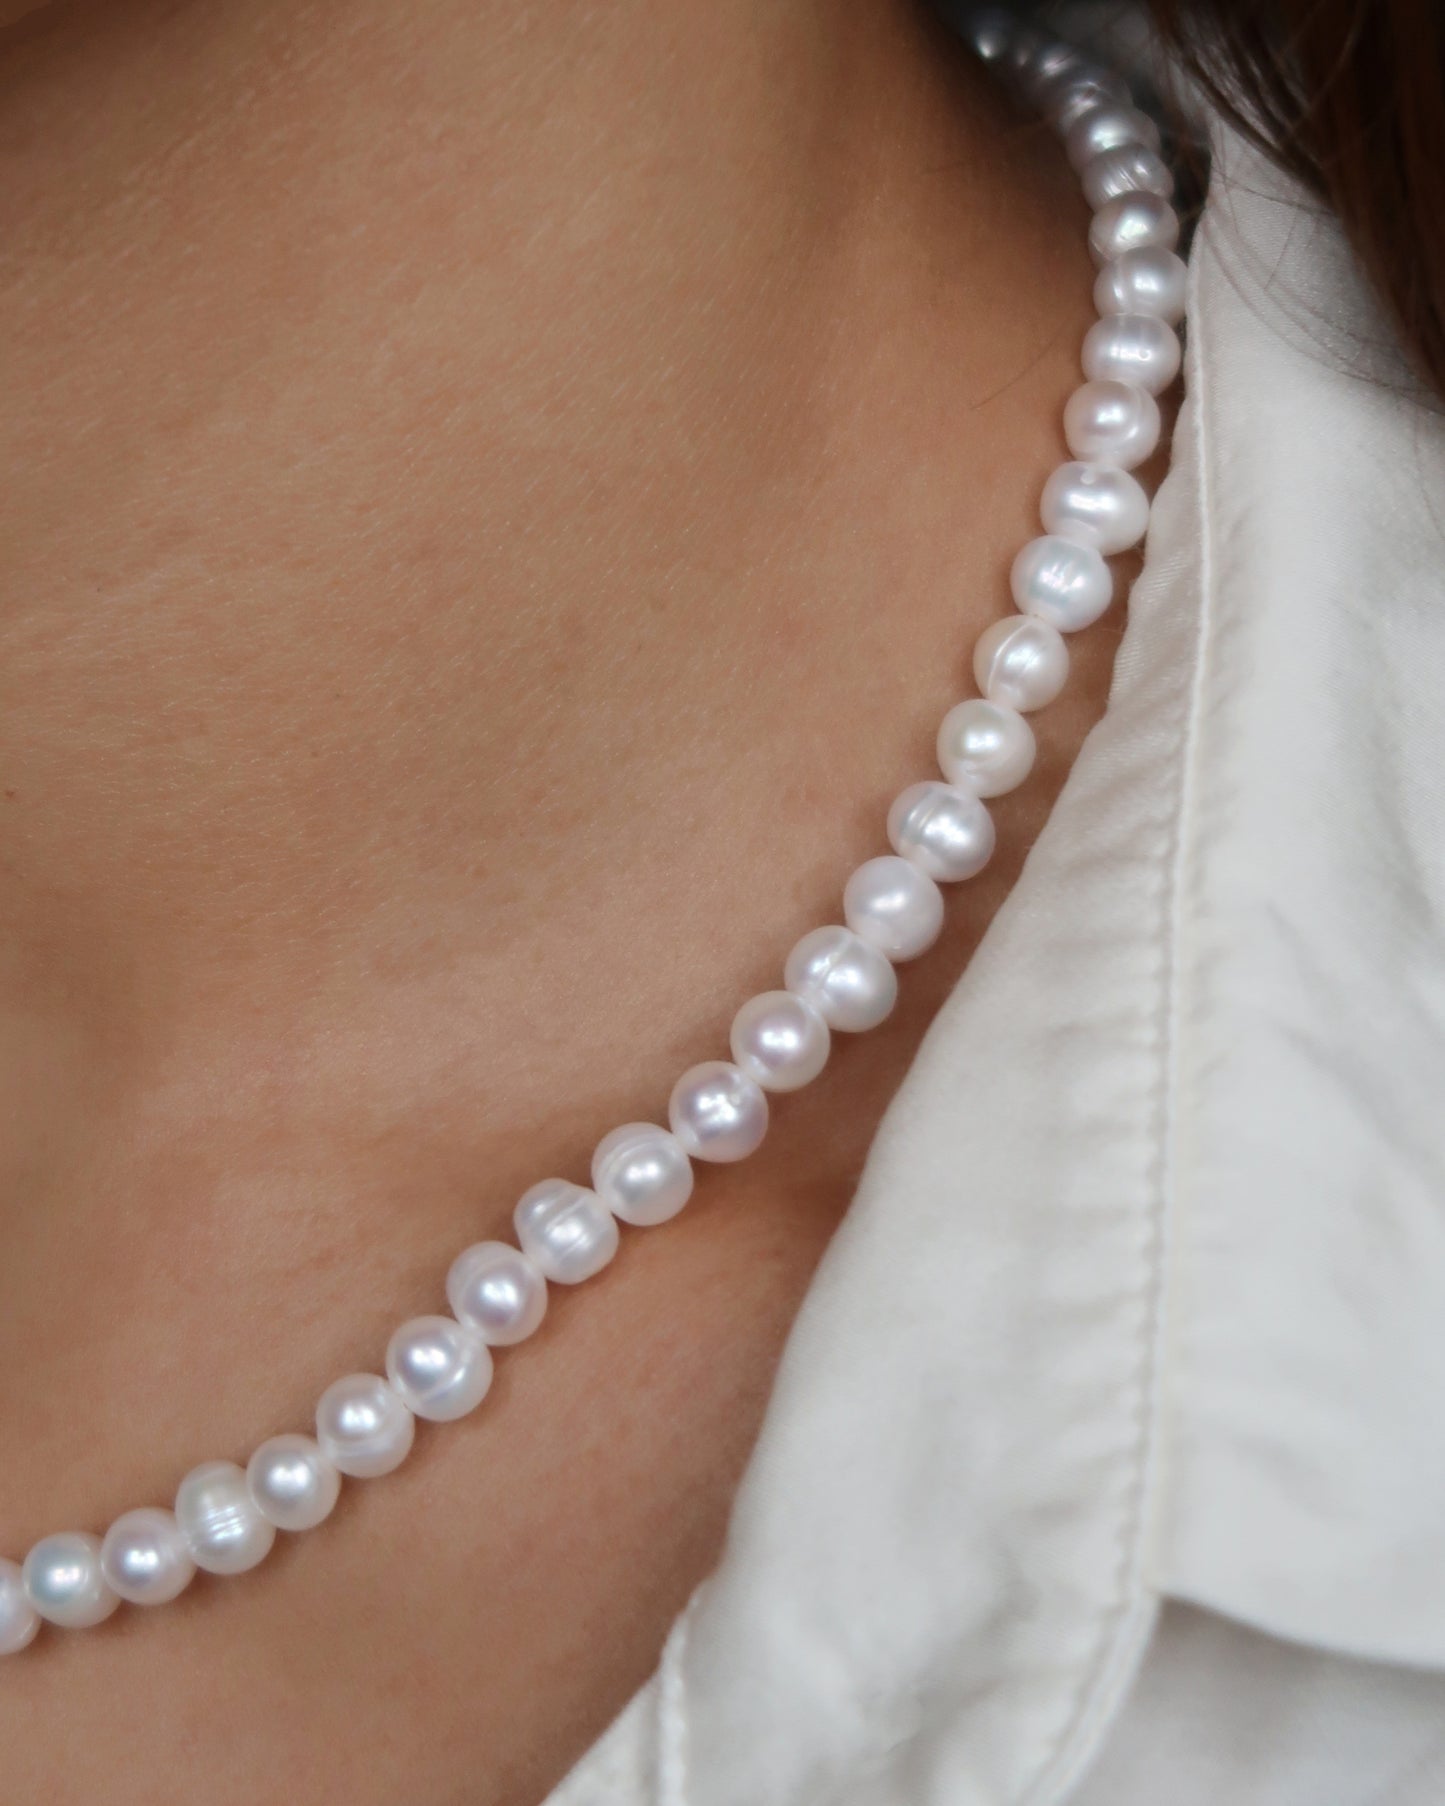 Maya Melbourne Round Pearl Necklace Small - Silver Clasp